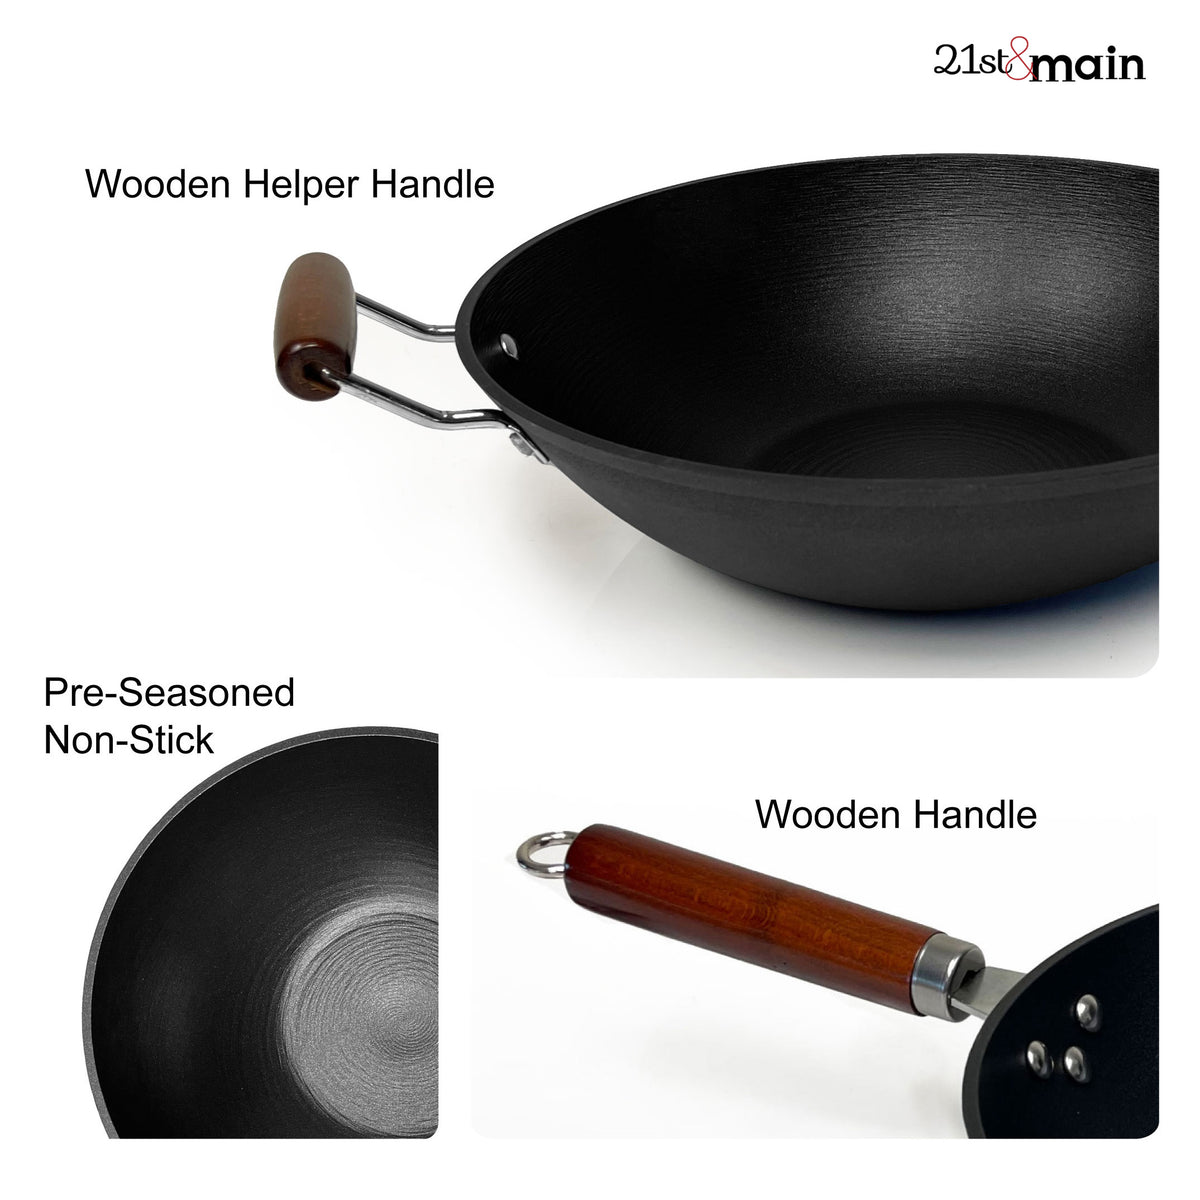 21st & Main Light Weight Cast Iron Wok, Stir Fry Pan, Wooden Handle, with Glass Lid, 11 inch, Chef’s Pan, Pre-Seasoned Nonstick, for Chinese